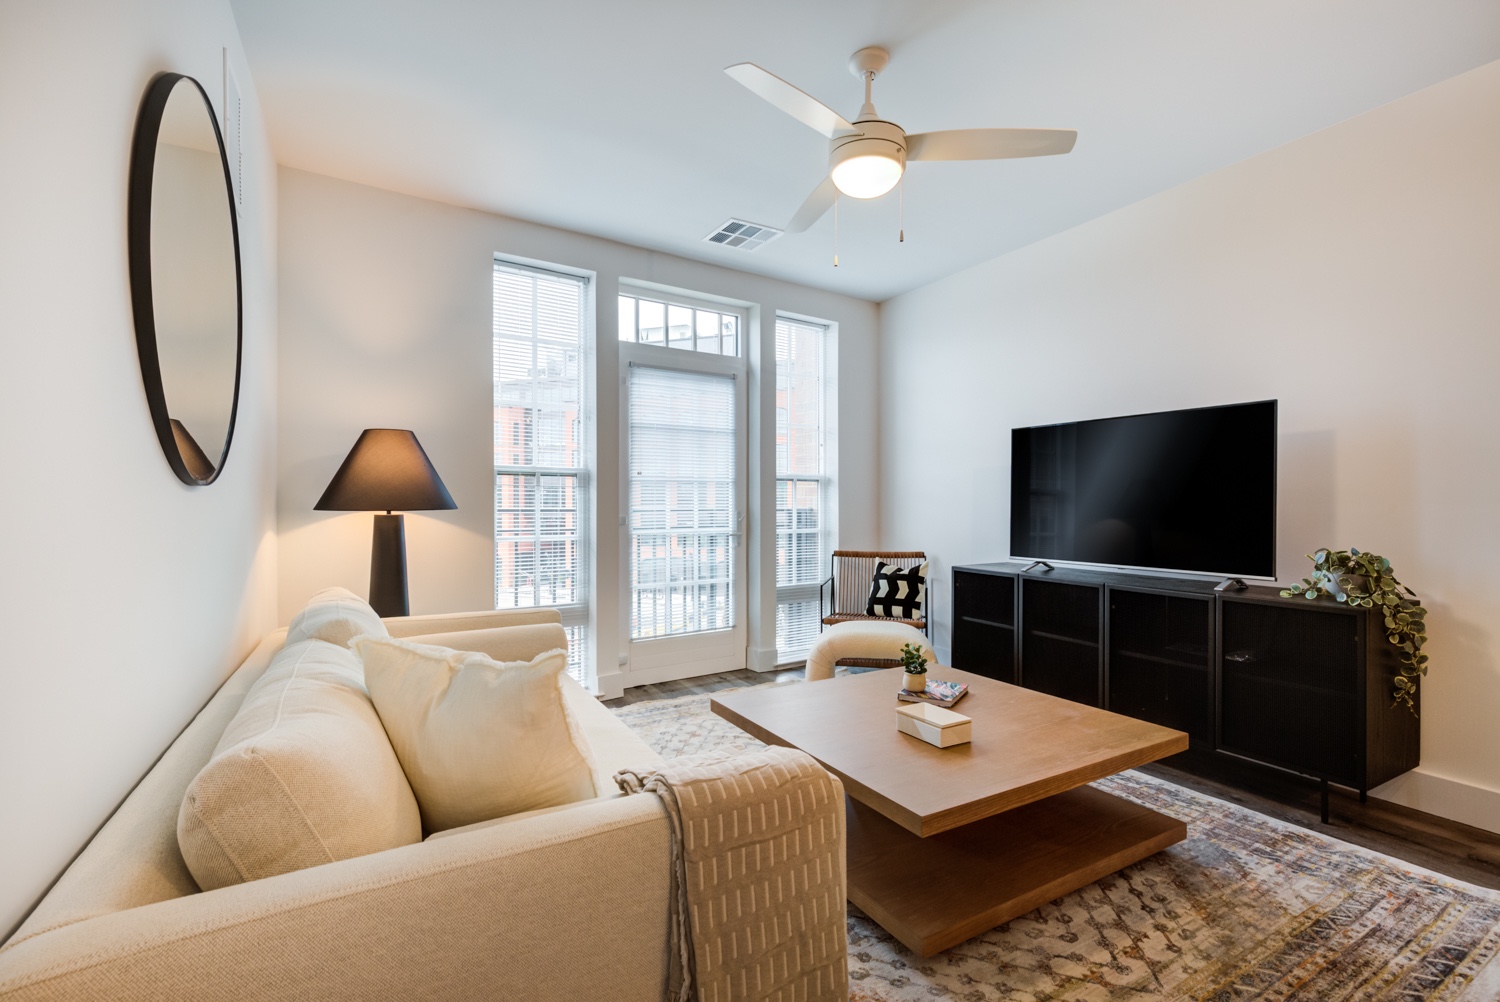 Relaxing living room setup with couch, television, and fan, plus balcony. Inside our luxury apartments at 250 Mission.